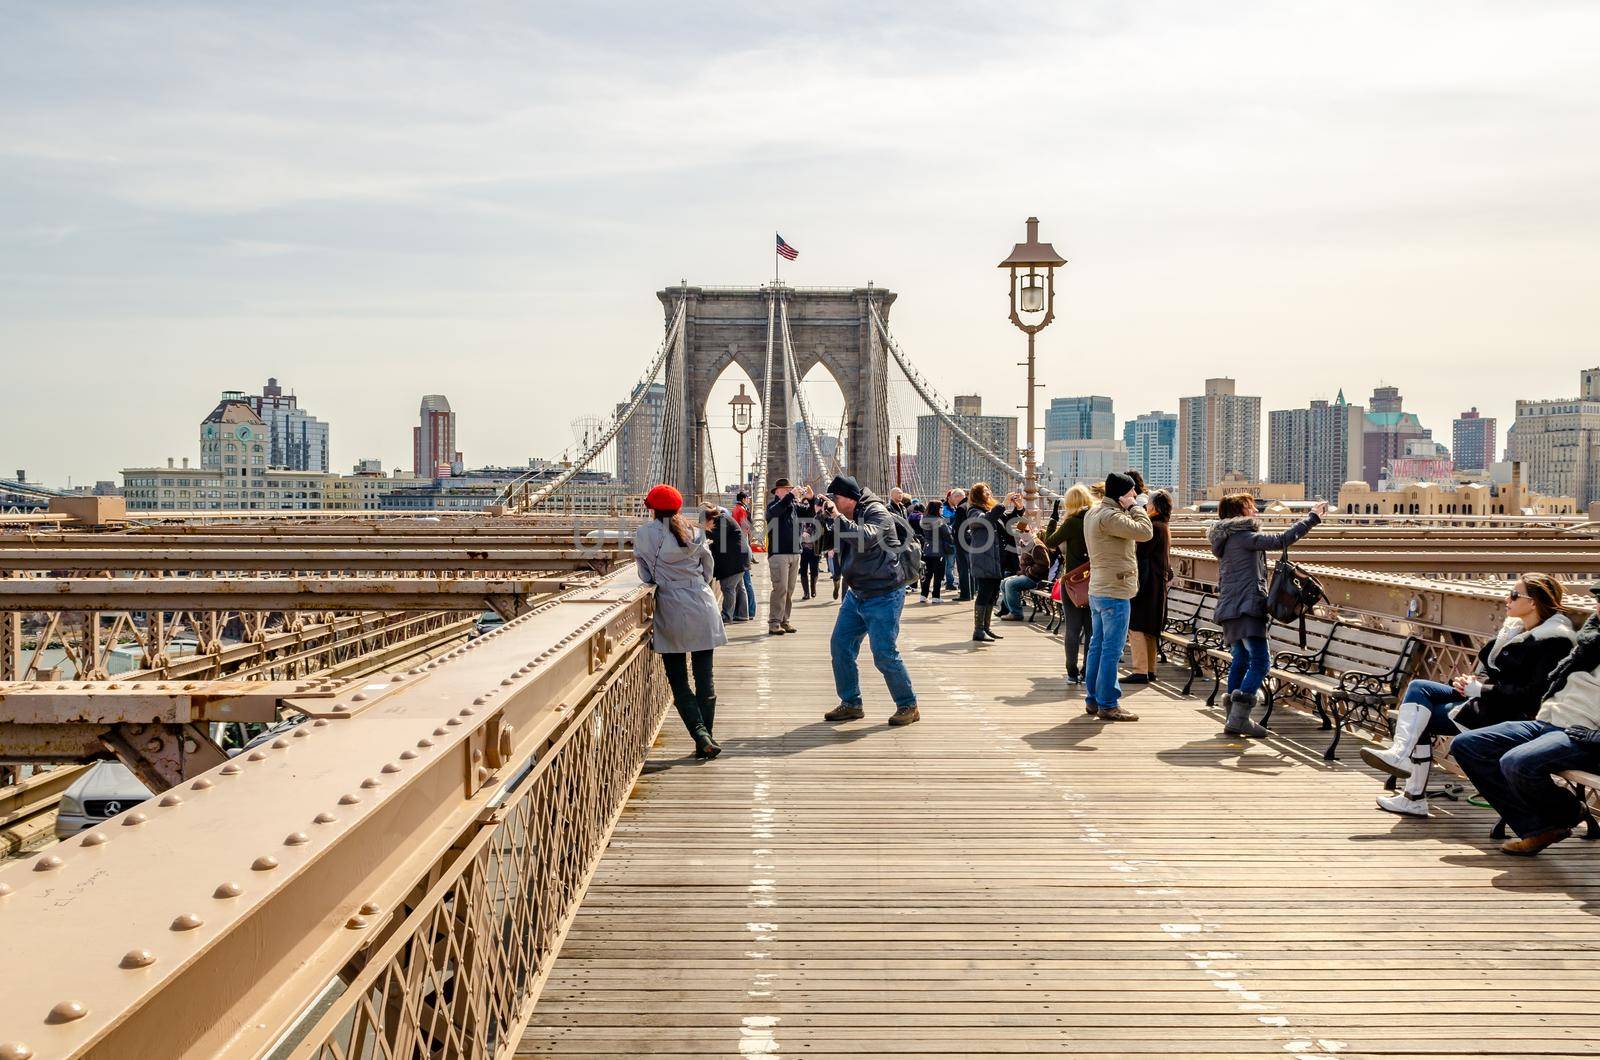 Brooklyn Bridge New York City with tourists taking photos and relaxing on the bridge by bildgigant